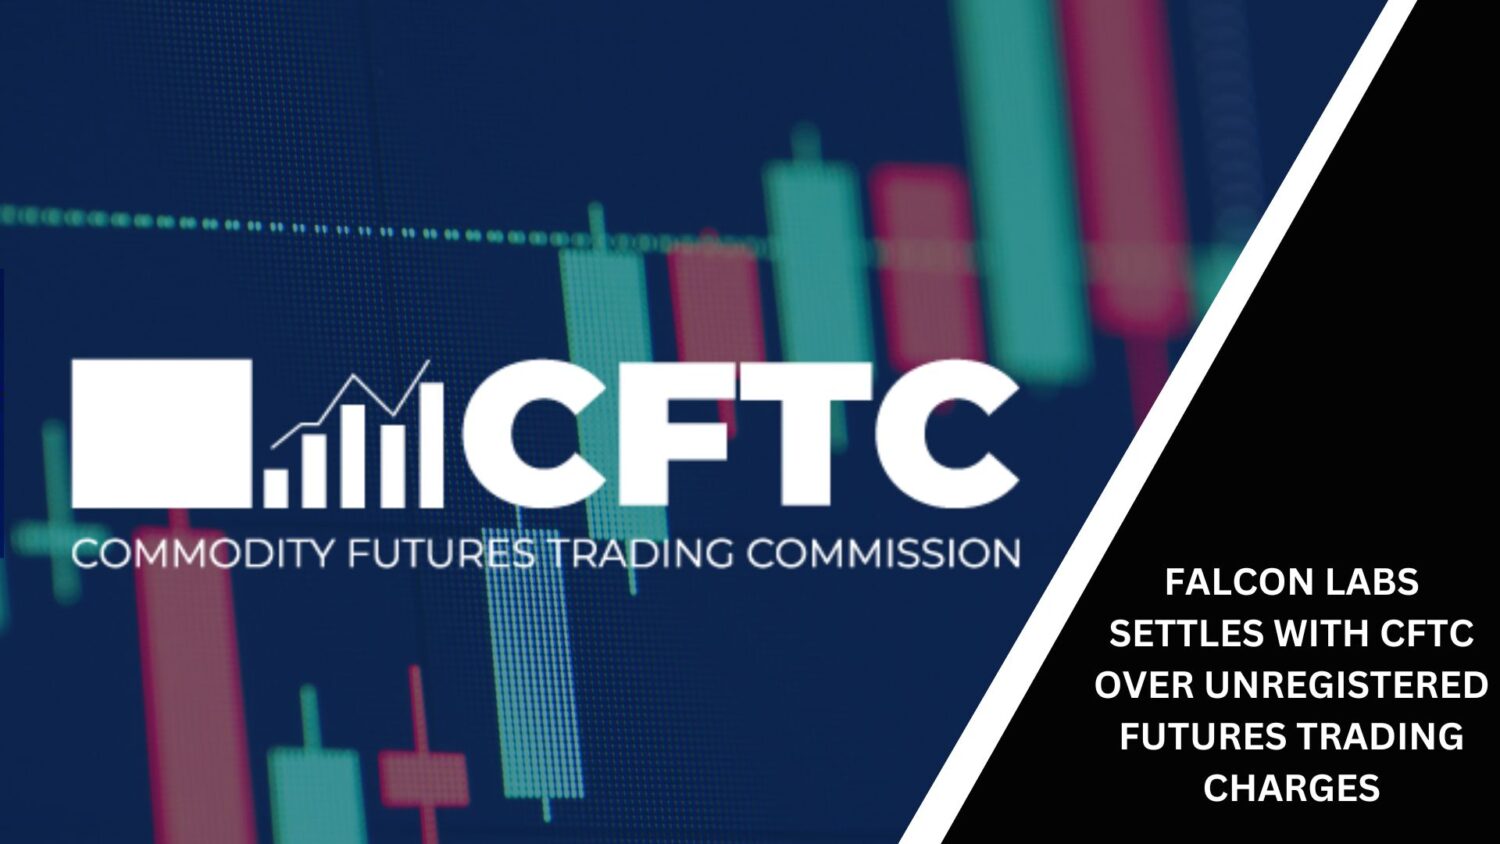 Falcon Labs Settles With Cftc Over Unregistered Futures Trading Charges